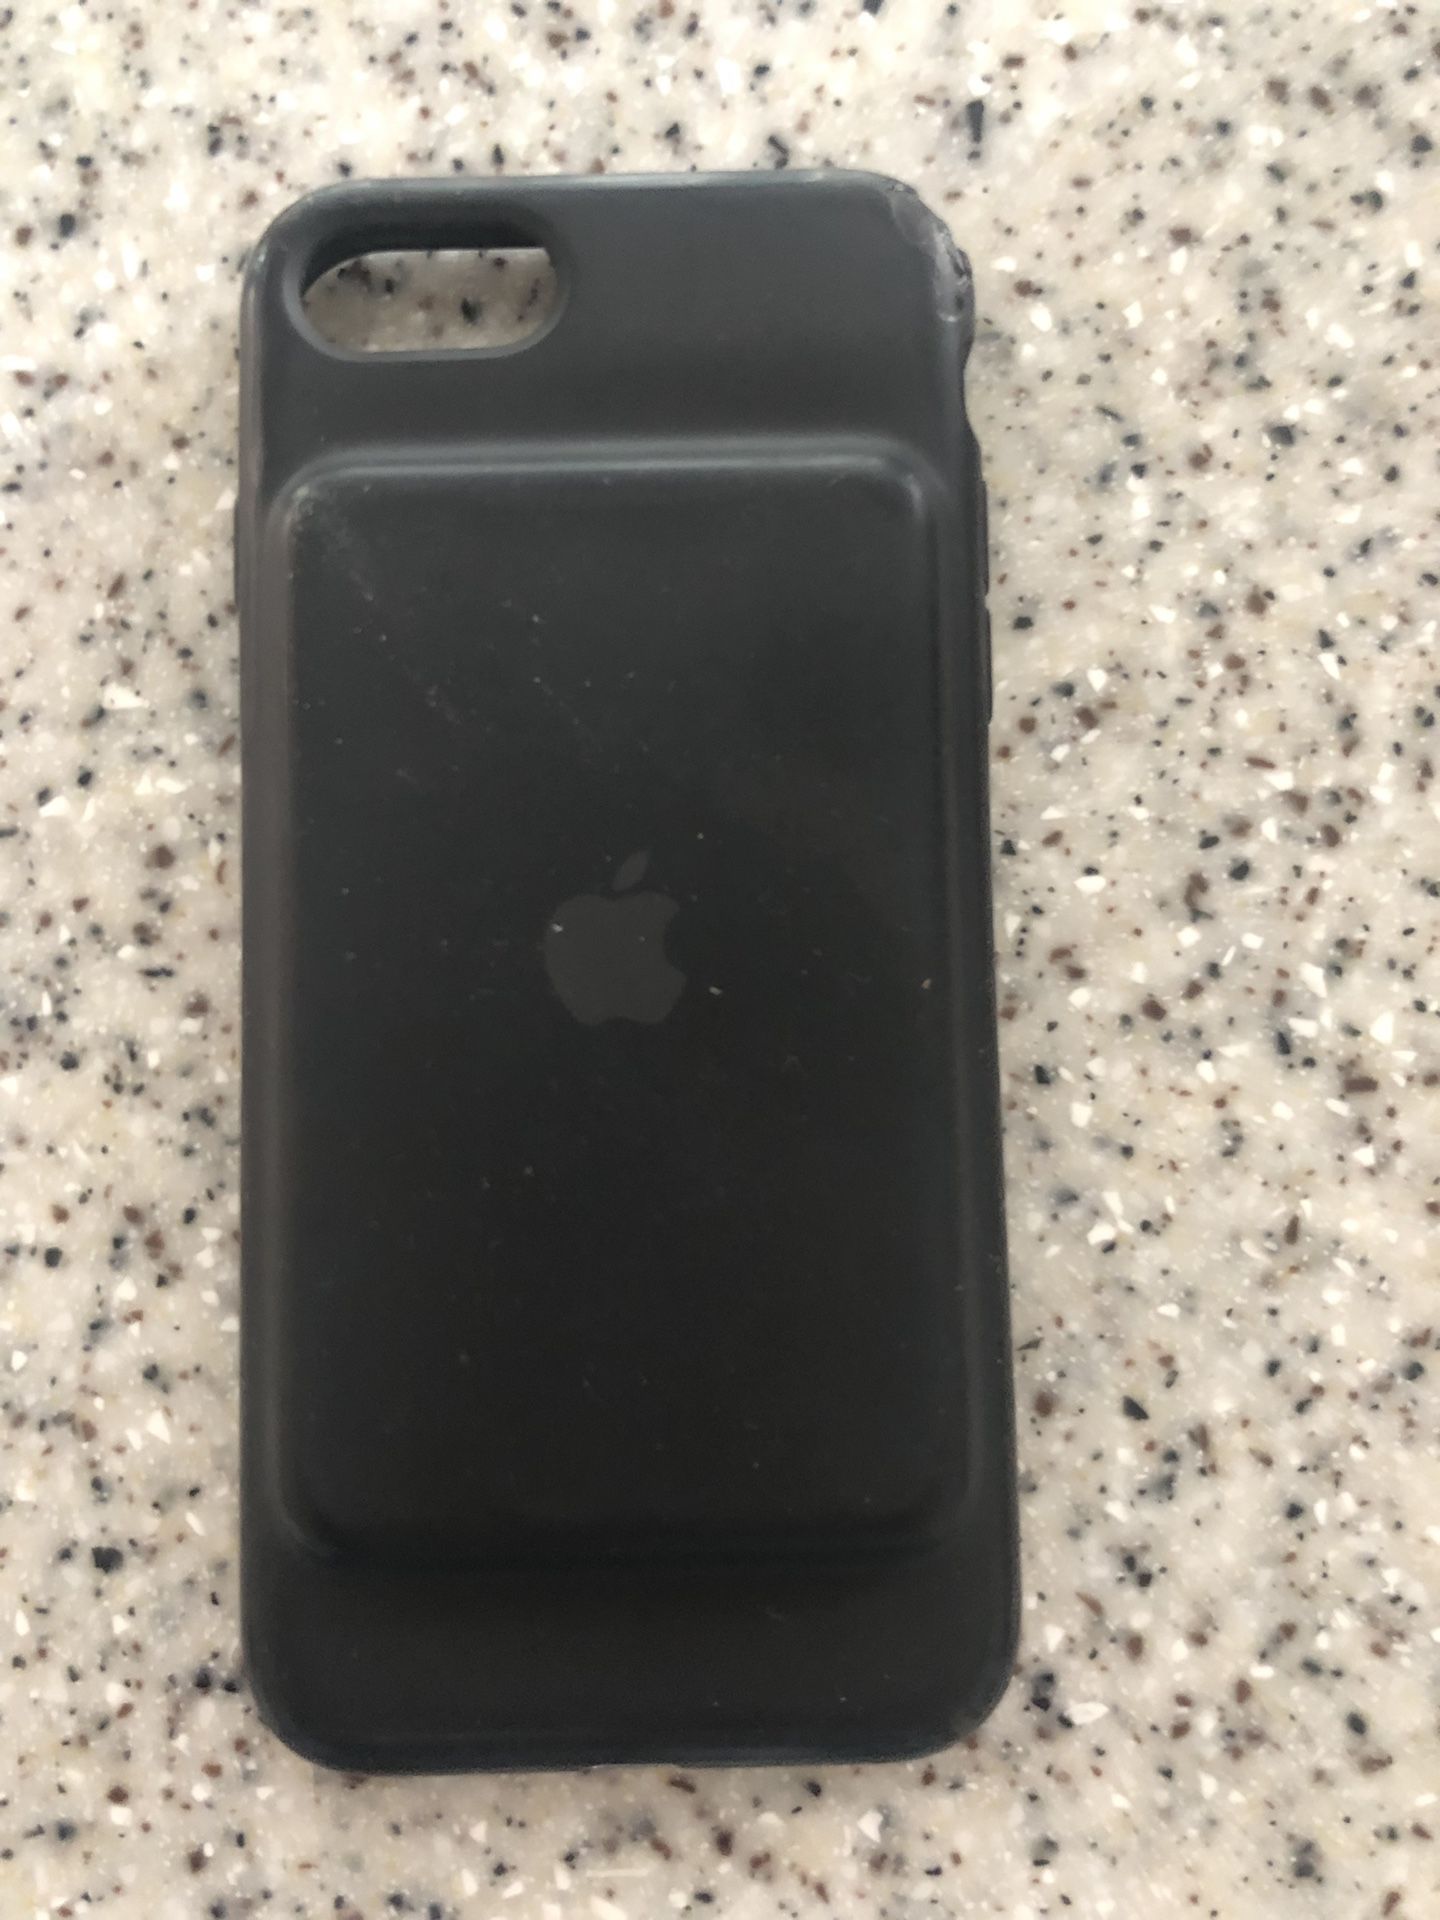 iPhone 6//7/8 battery case by Apple